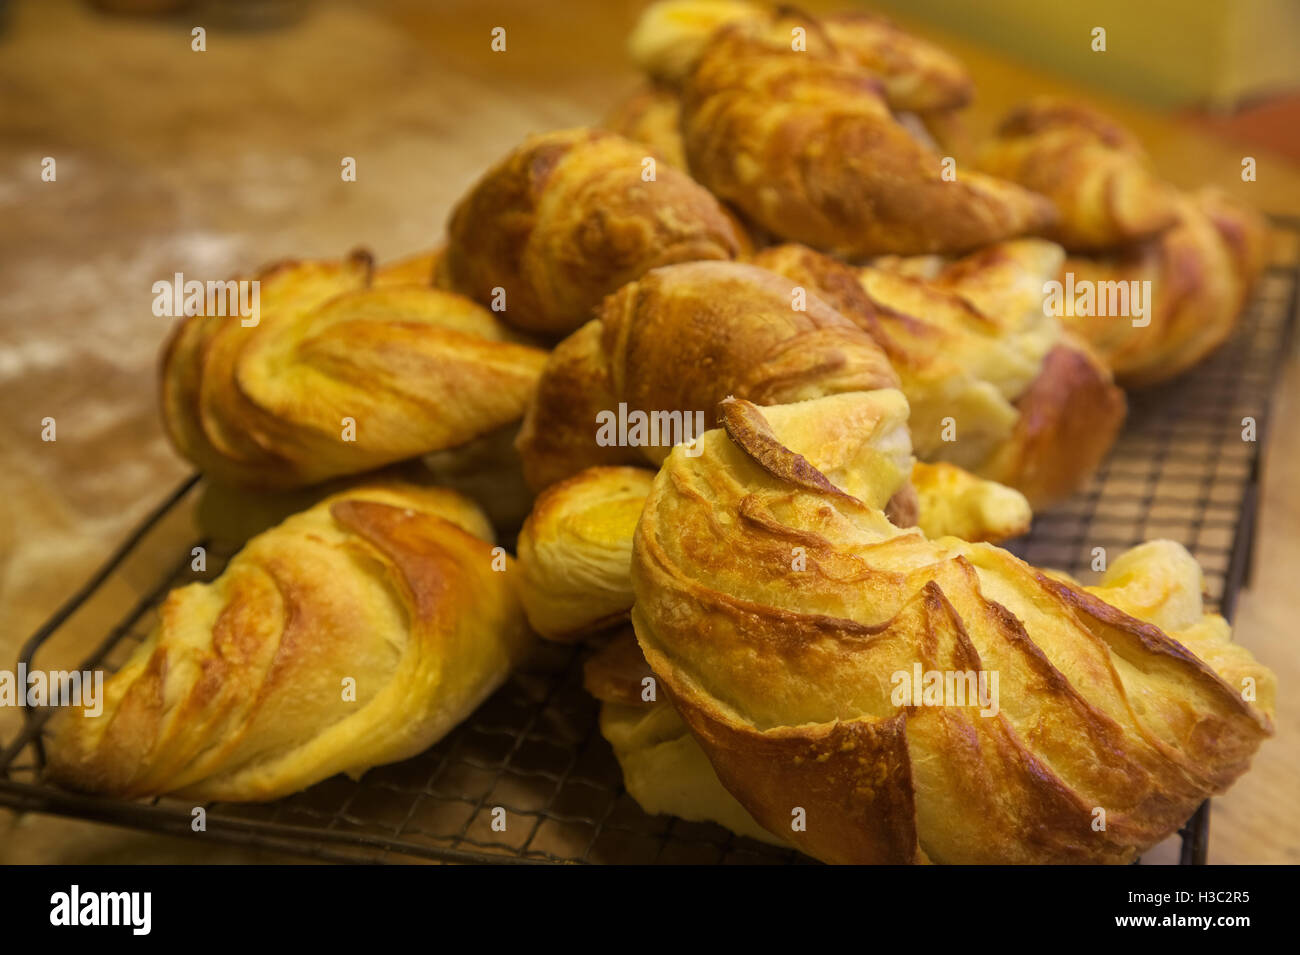 Domestic baking - home made croissants Stock Photo